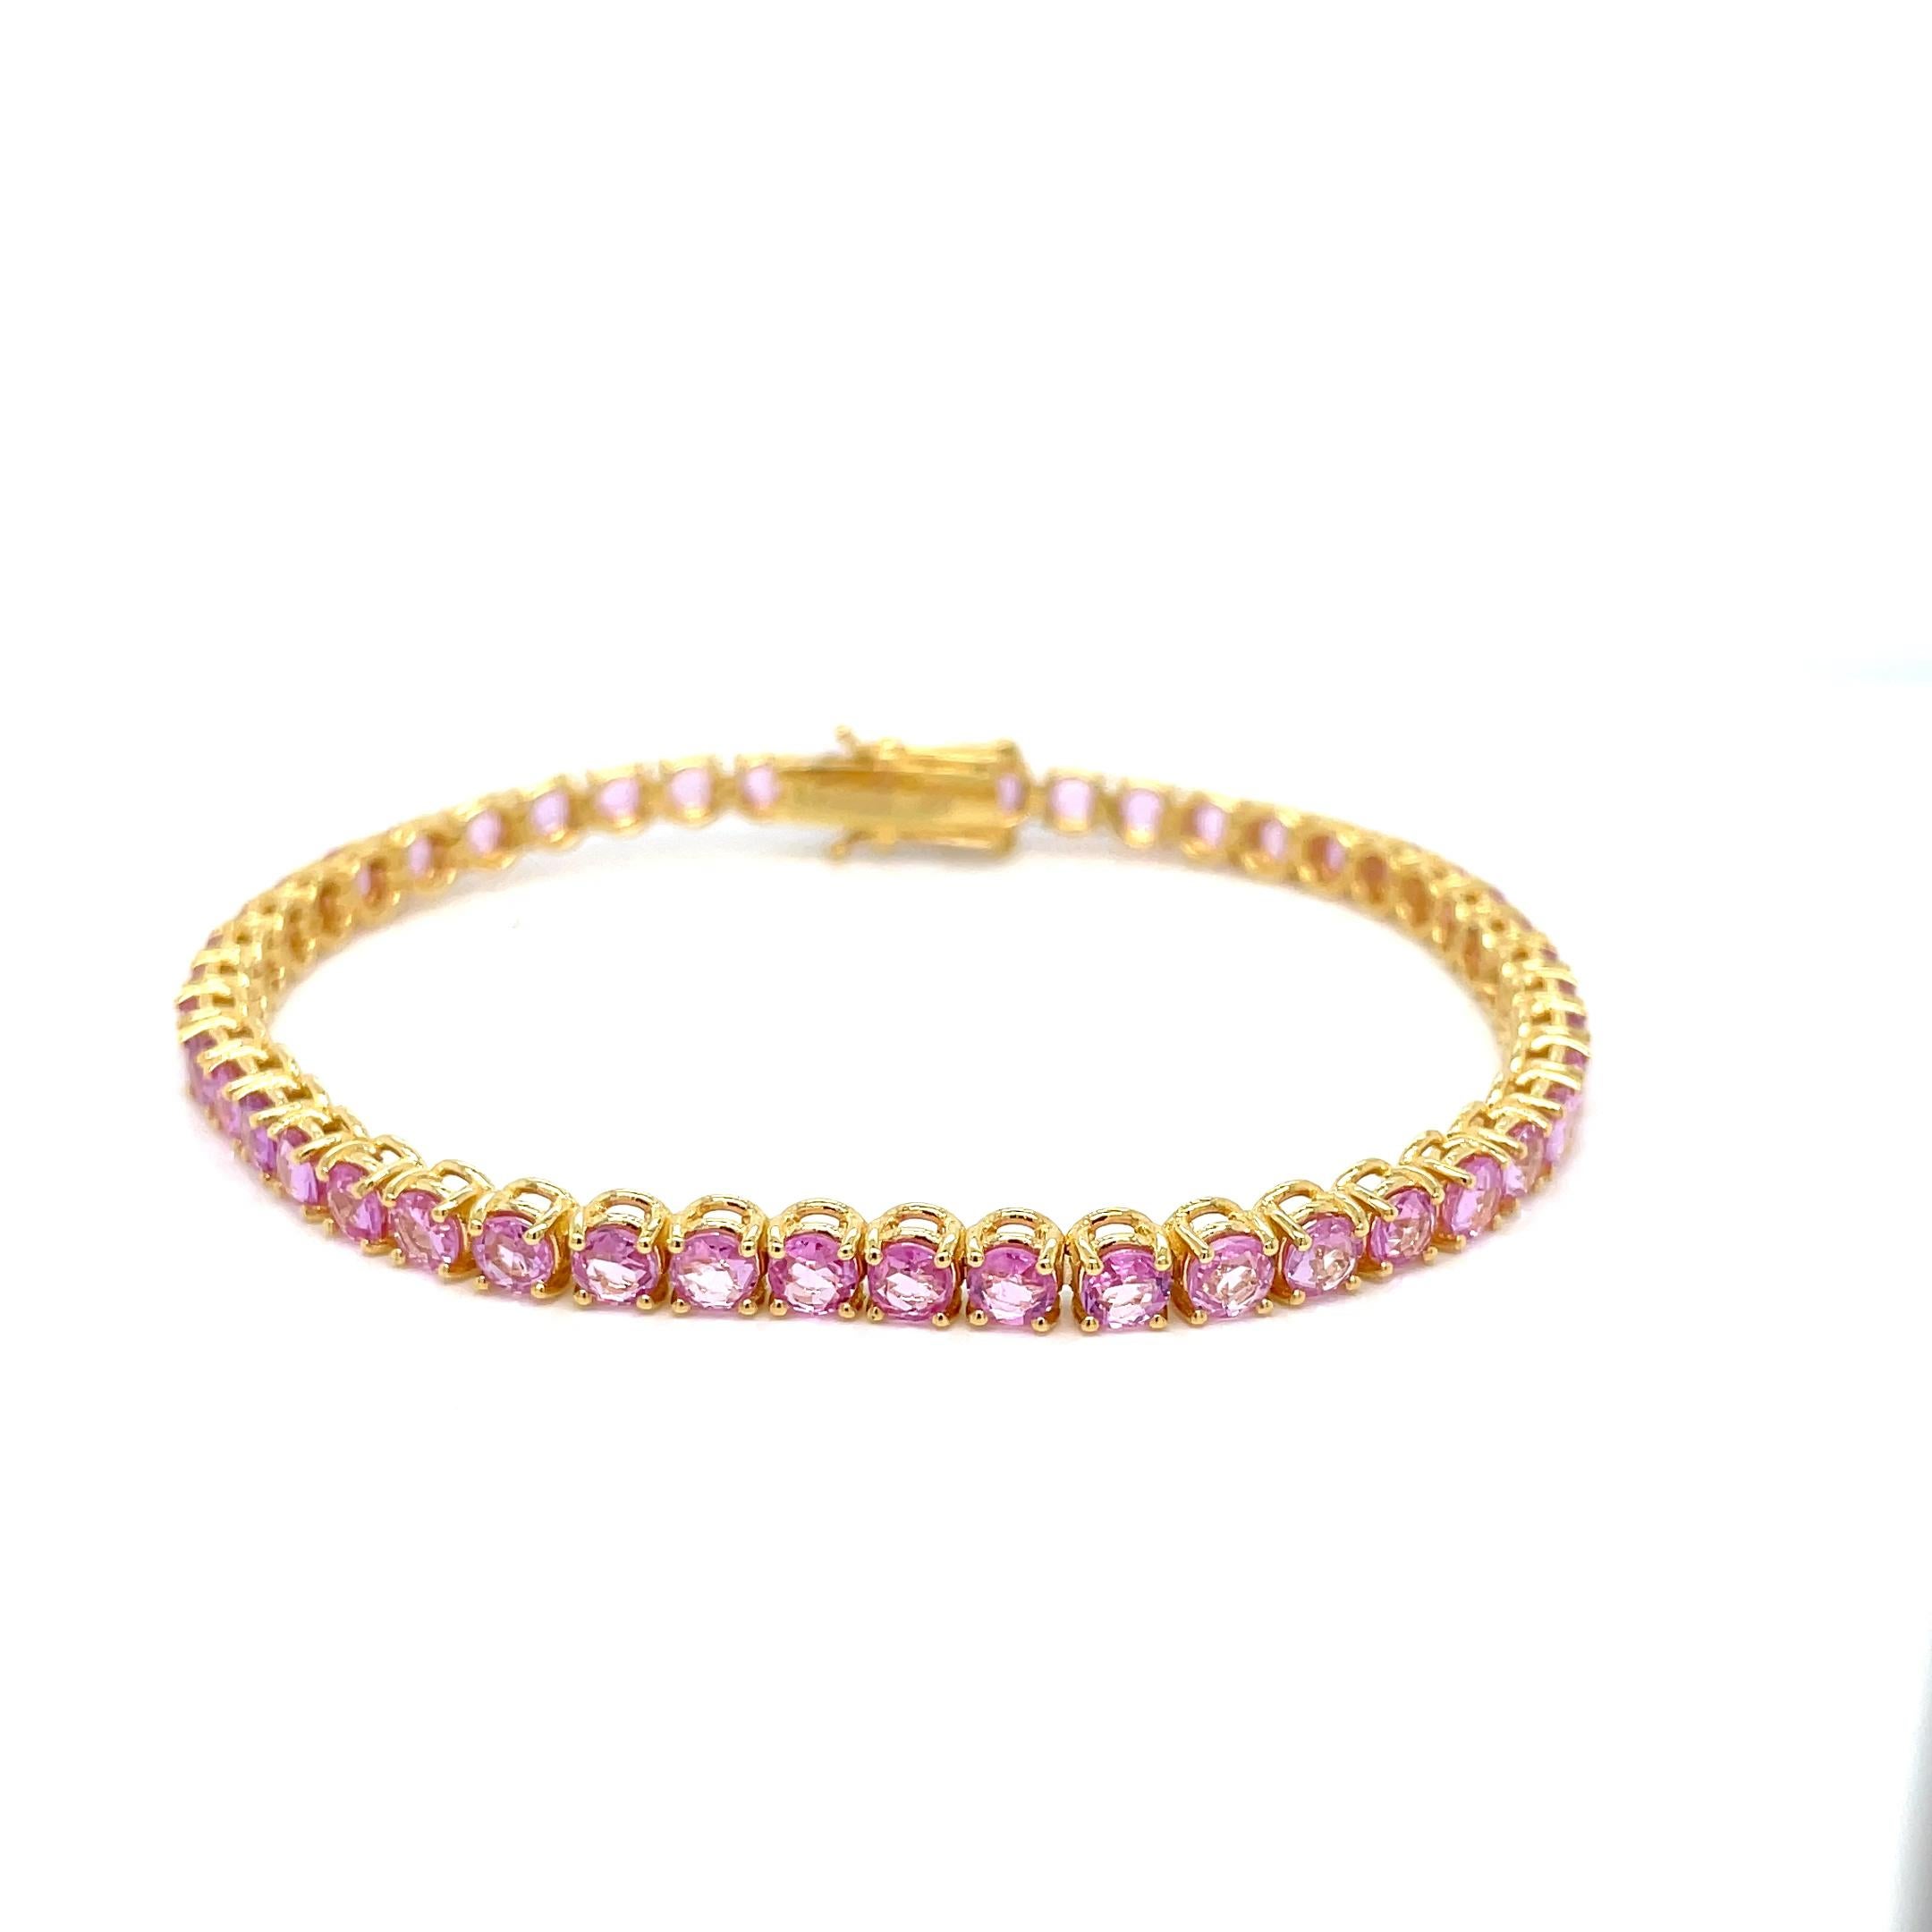 10 Carat Natural Pink Sapphire Yellow Gold Tennis Bracelet In New Condition For Sale In Napoli, Italy